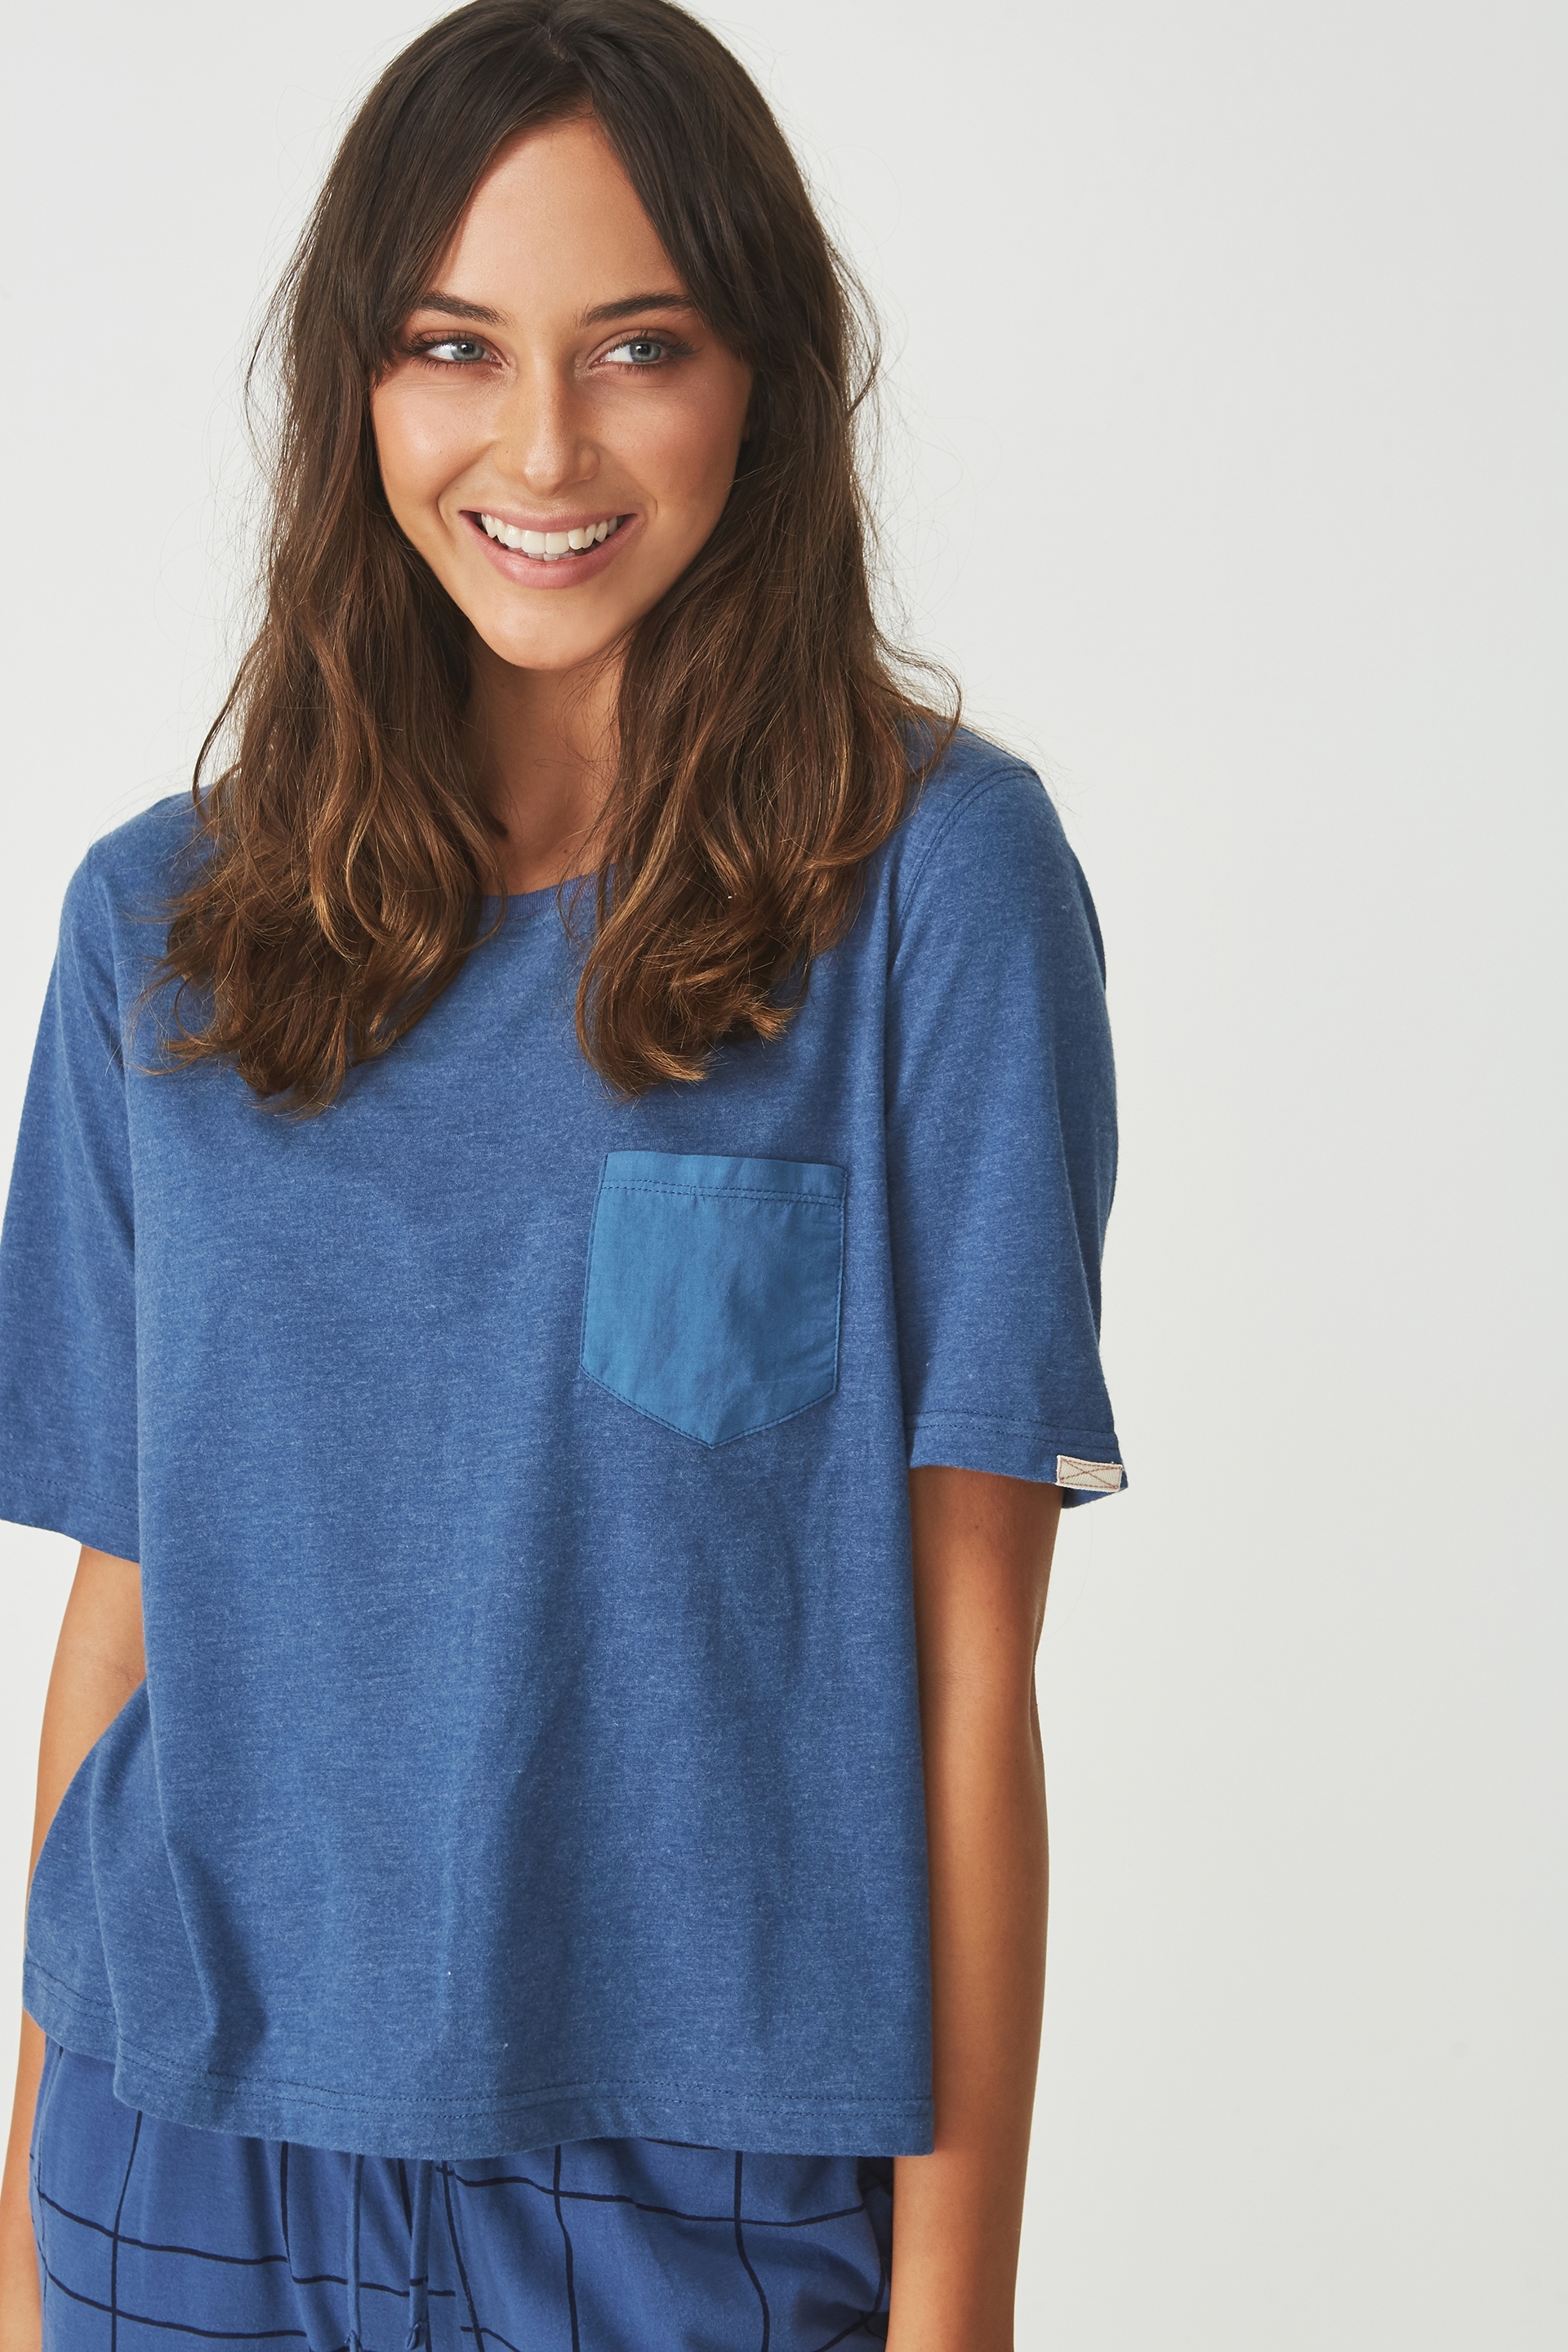 Get a better night's sleep this summer in the Boxy T Shirt. This relaxed pyjama top is all about the comfort and gives you plenty of room to move. Available in a range of fun prints and colours. - Regular length - Boxy fit - Rounded neckline - Comfortable jersey knit fabric MODEL WEARS SIZE: SMALL - AU 10 US 6 EUR 38 60% COTTON 40% POLYESTER